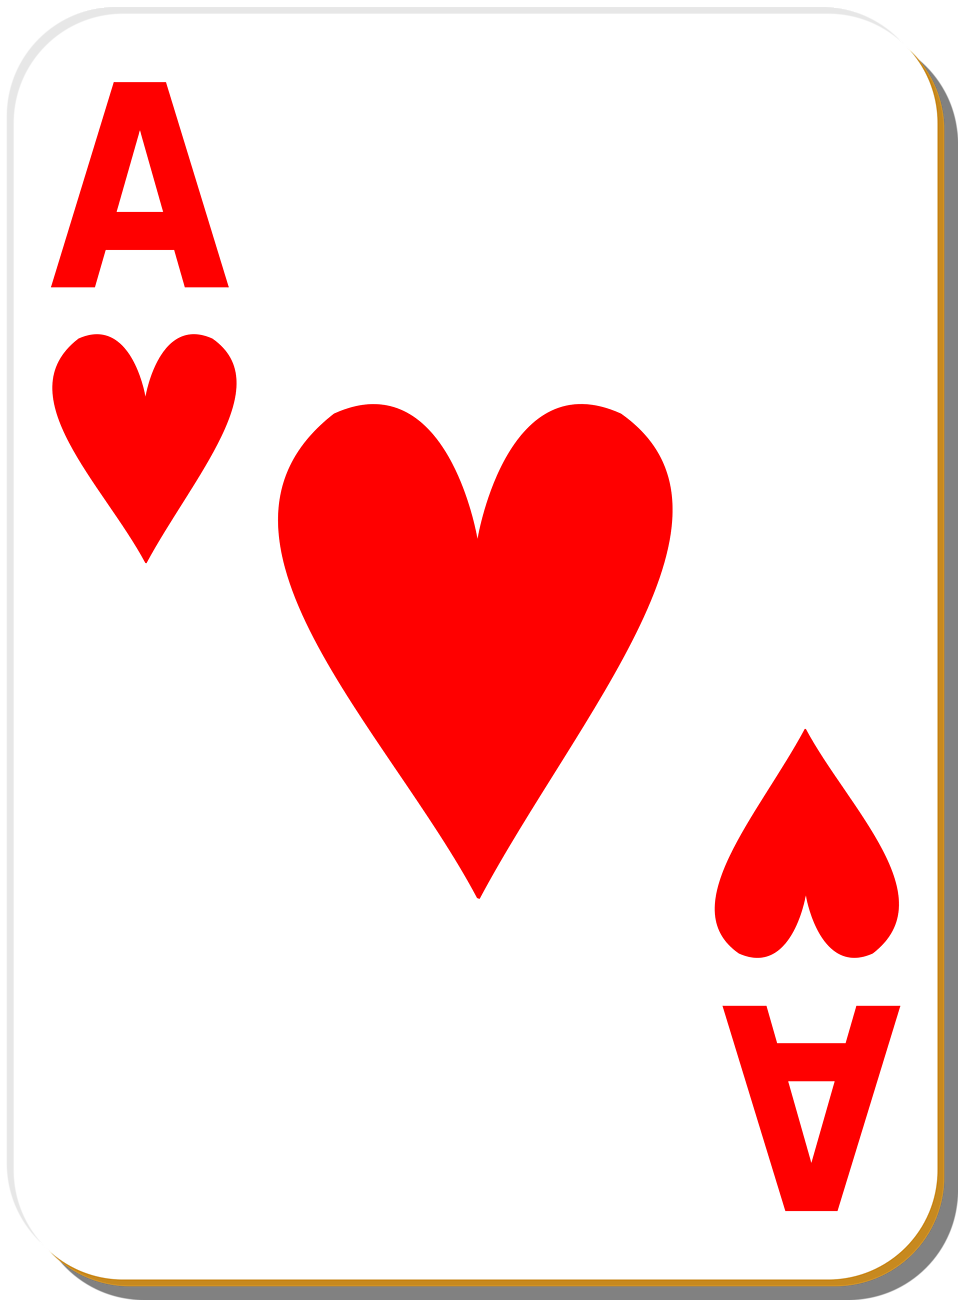 queen of hearts clip art free - photo #36